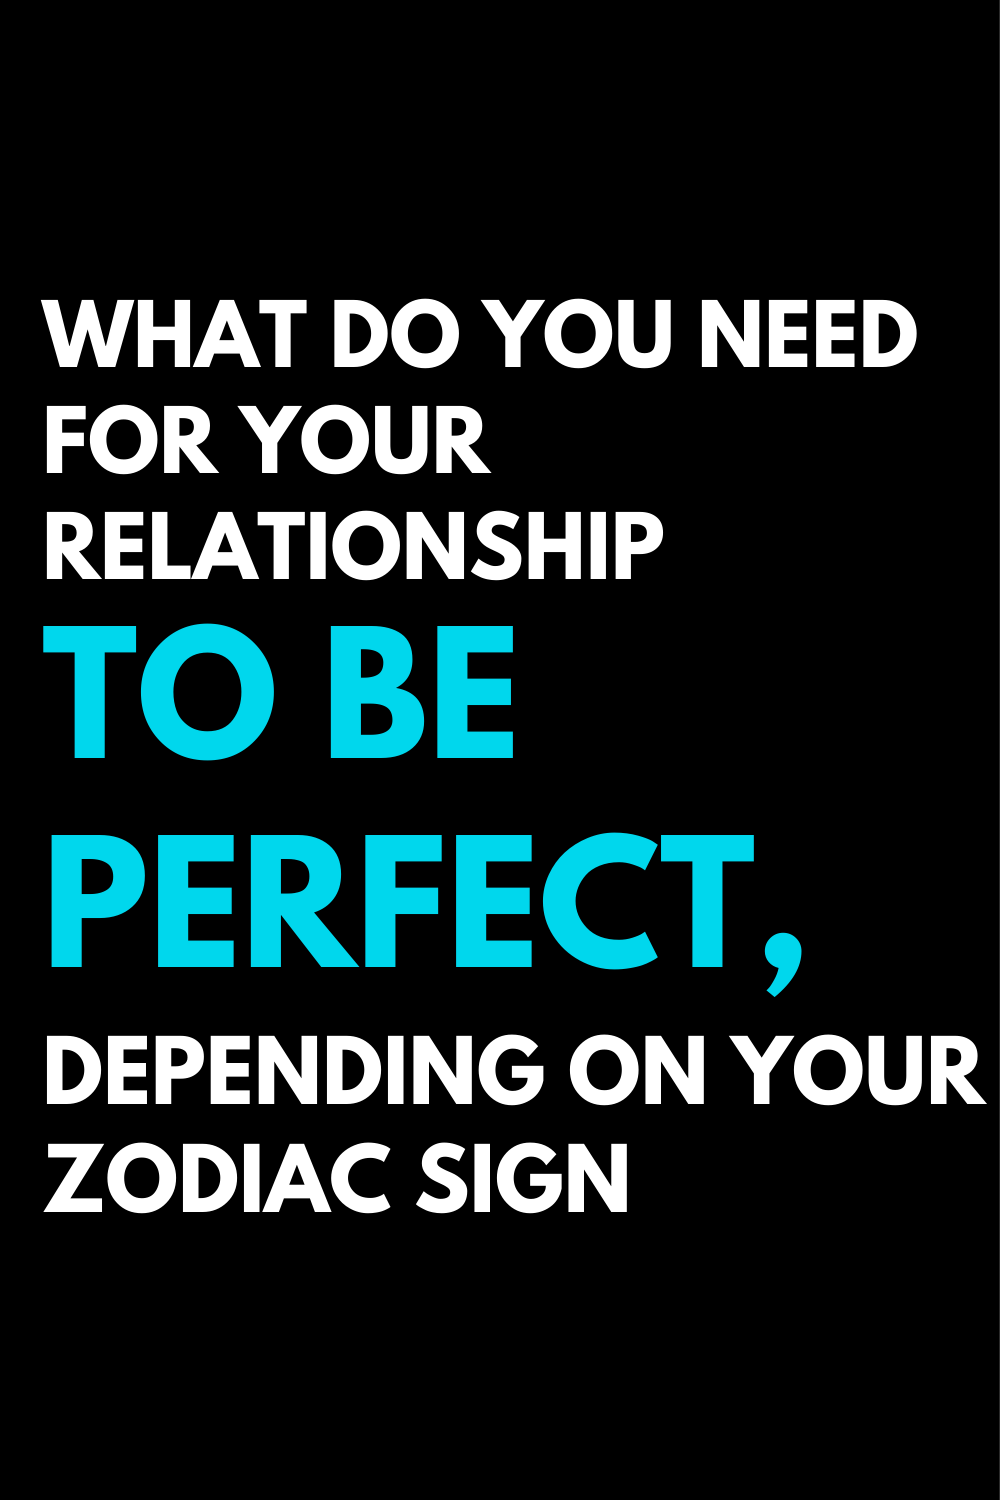 What do you need for your relationship to be perfect, depending on your zodiac sign